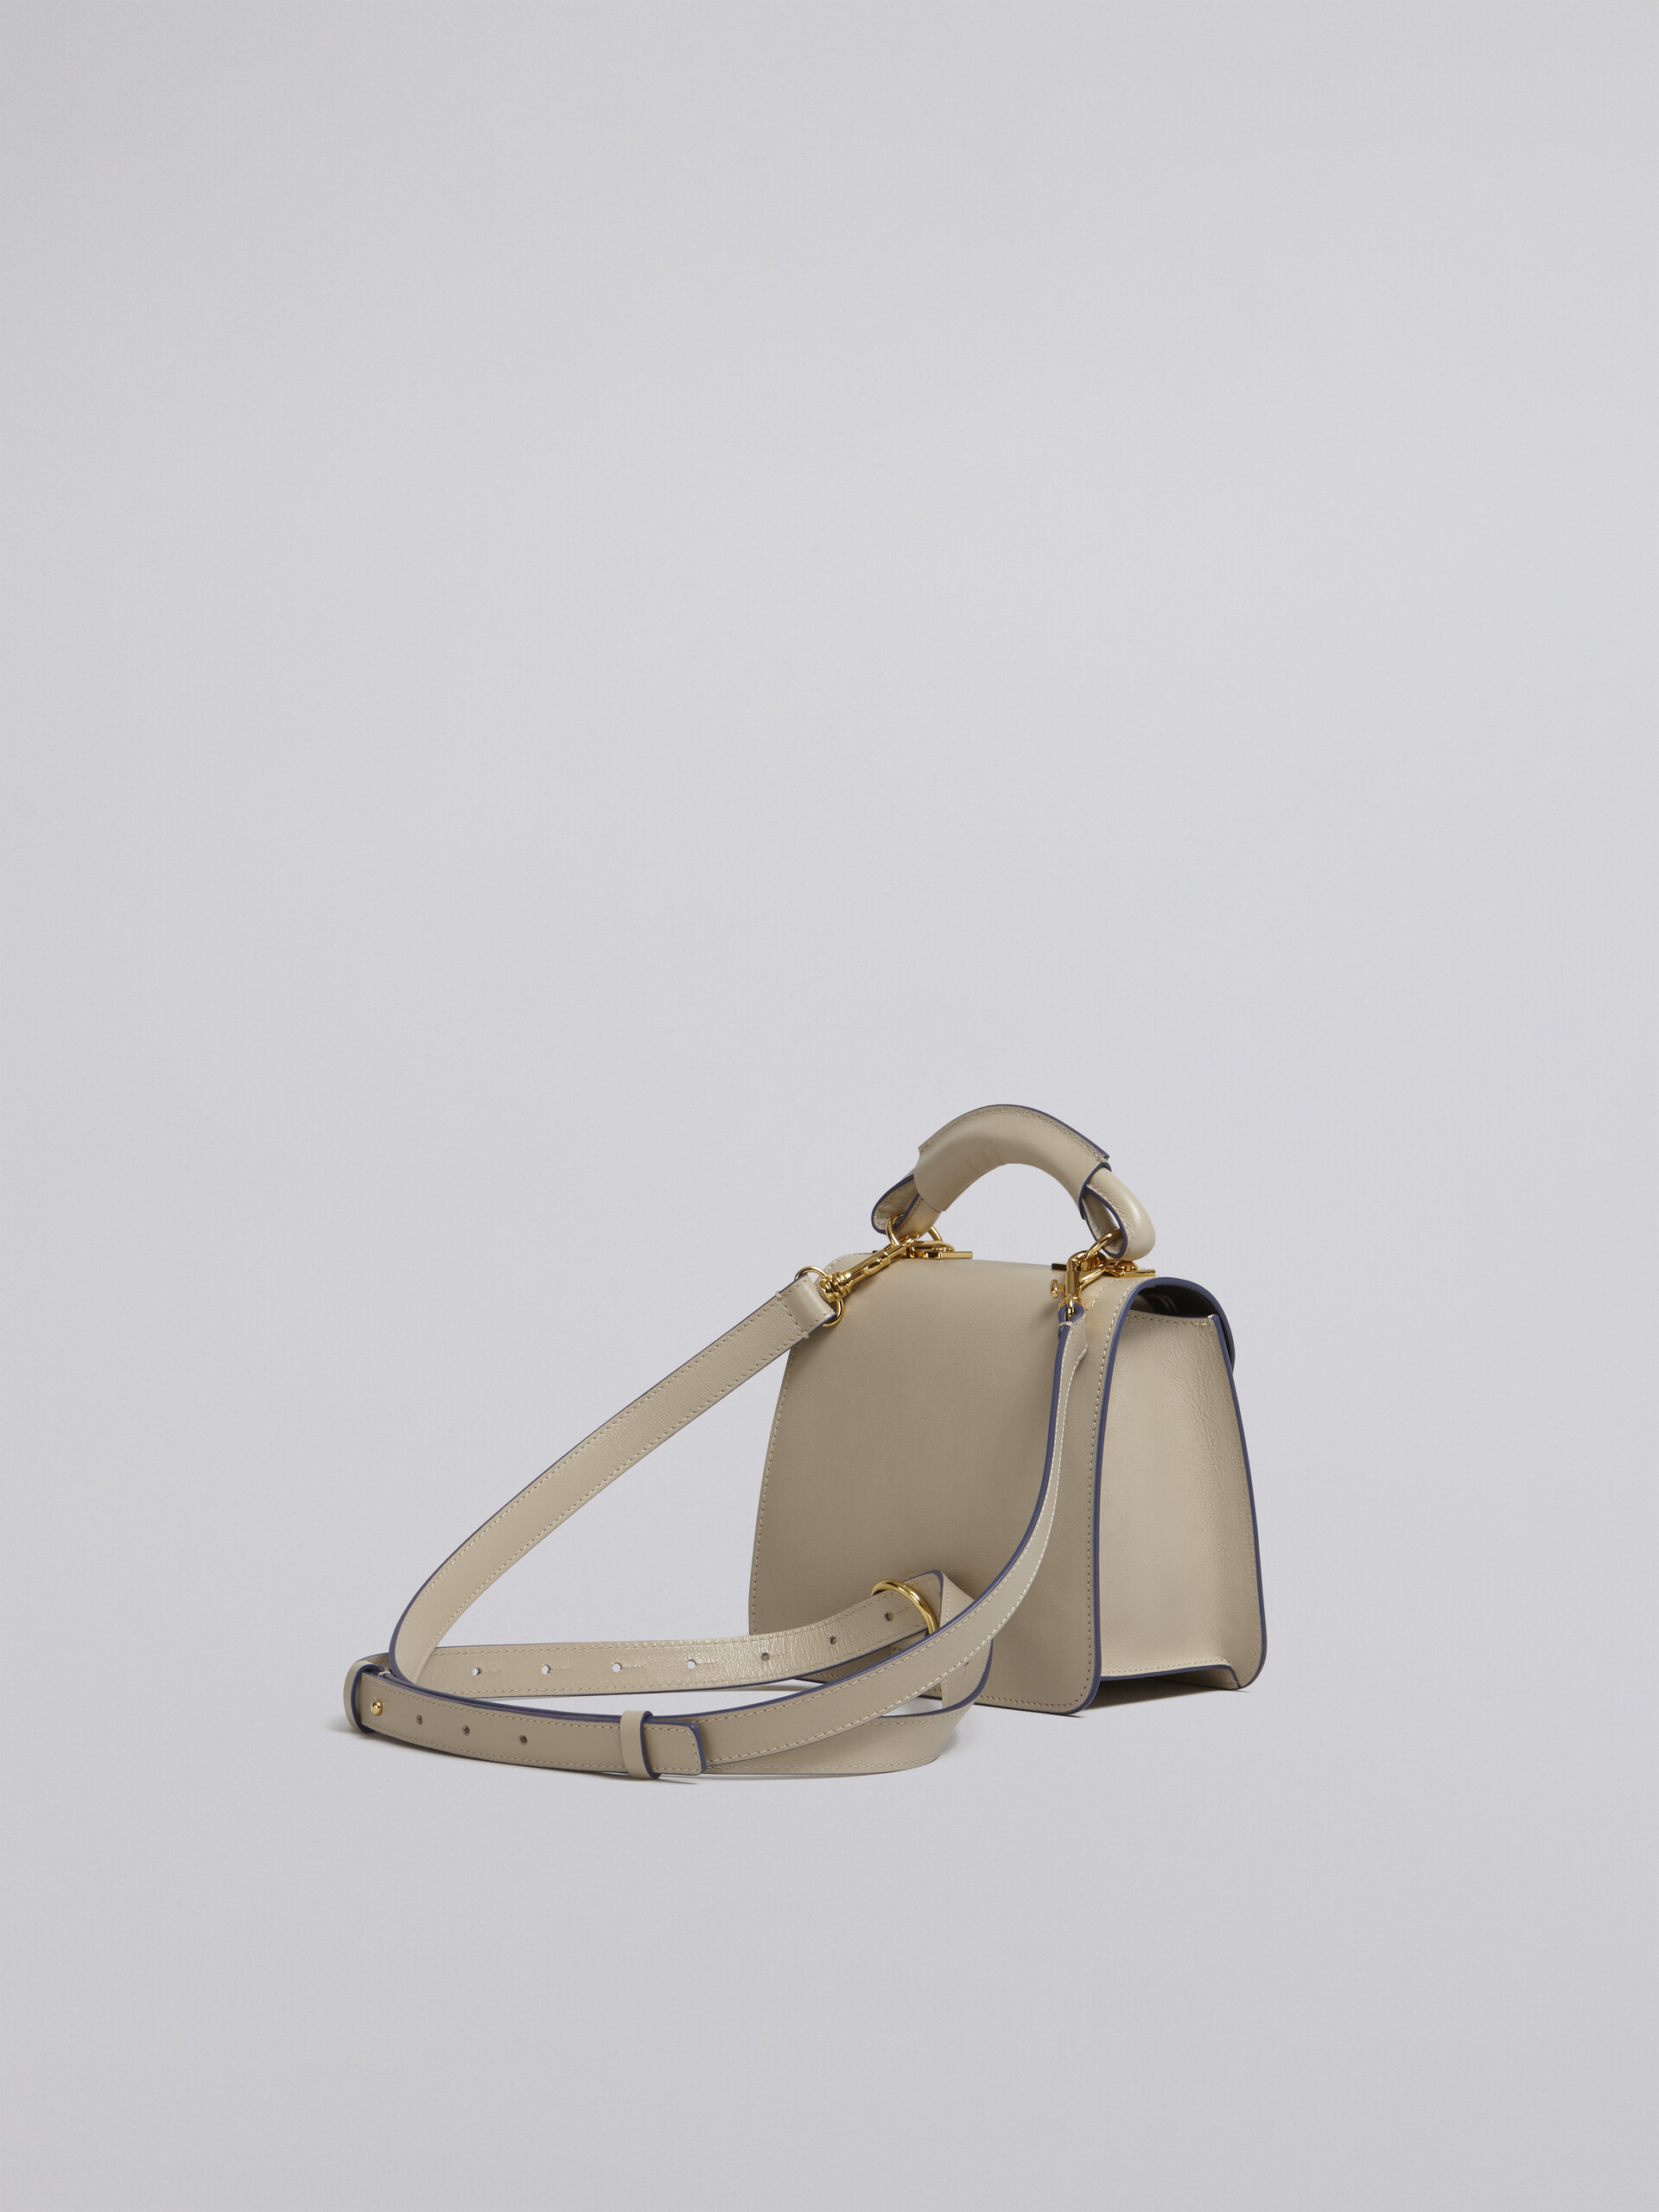 JULIETTE backpack in tumbled calf leather - Backpacks - Image 3